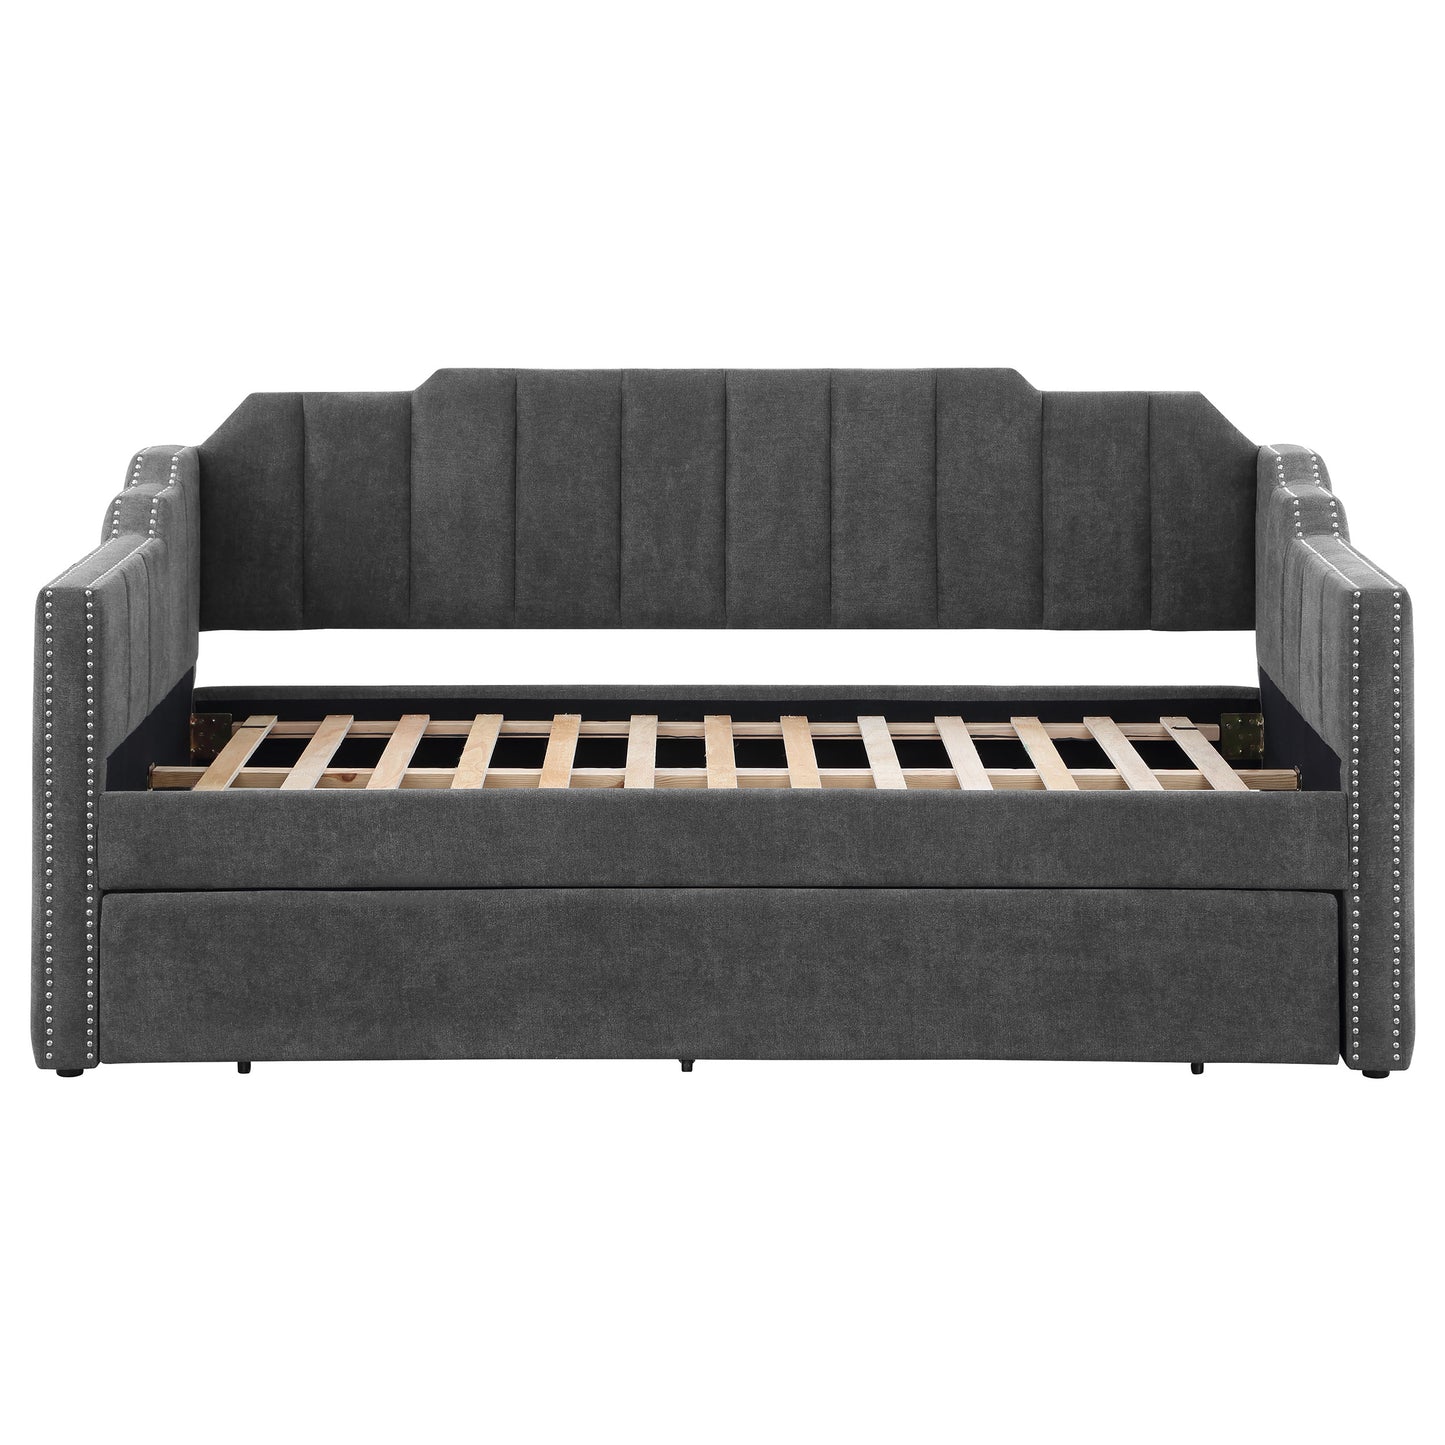 twin daybed w/ trundle